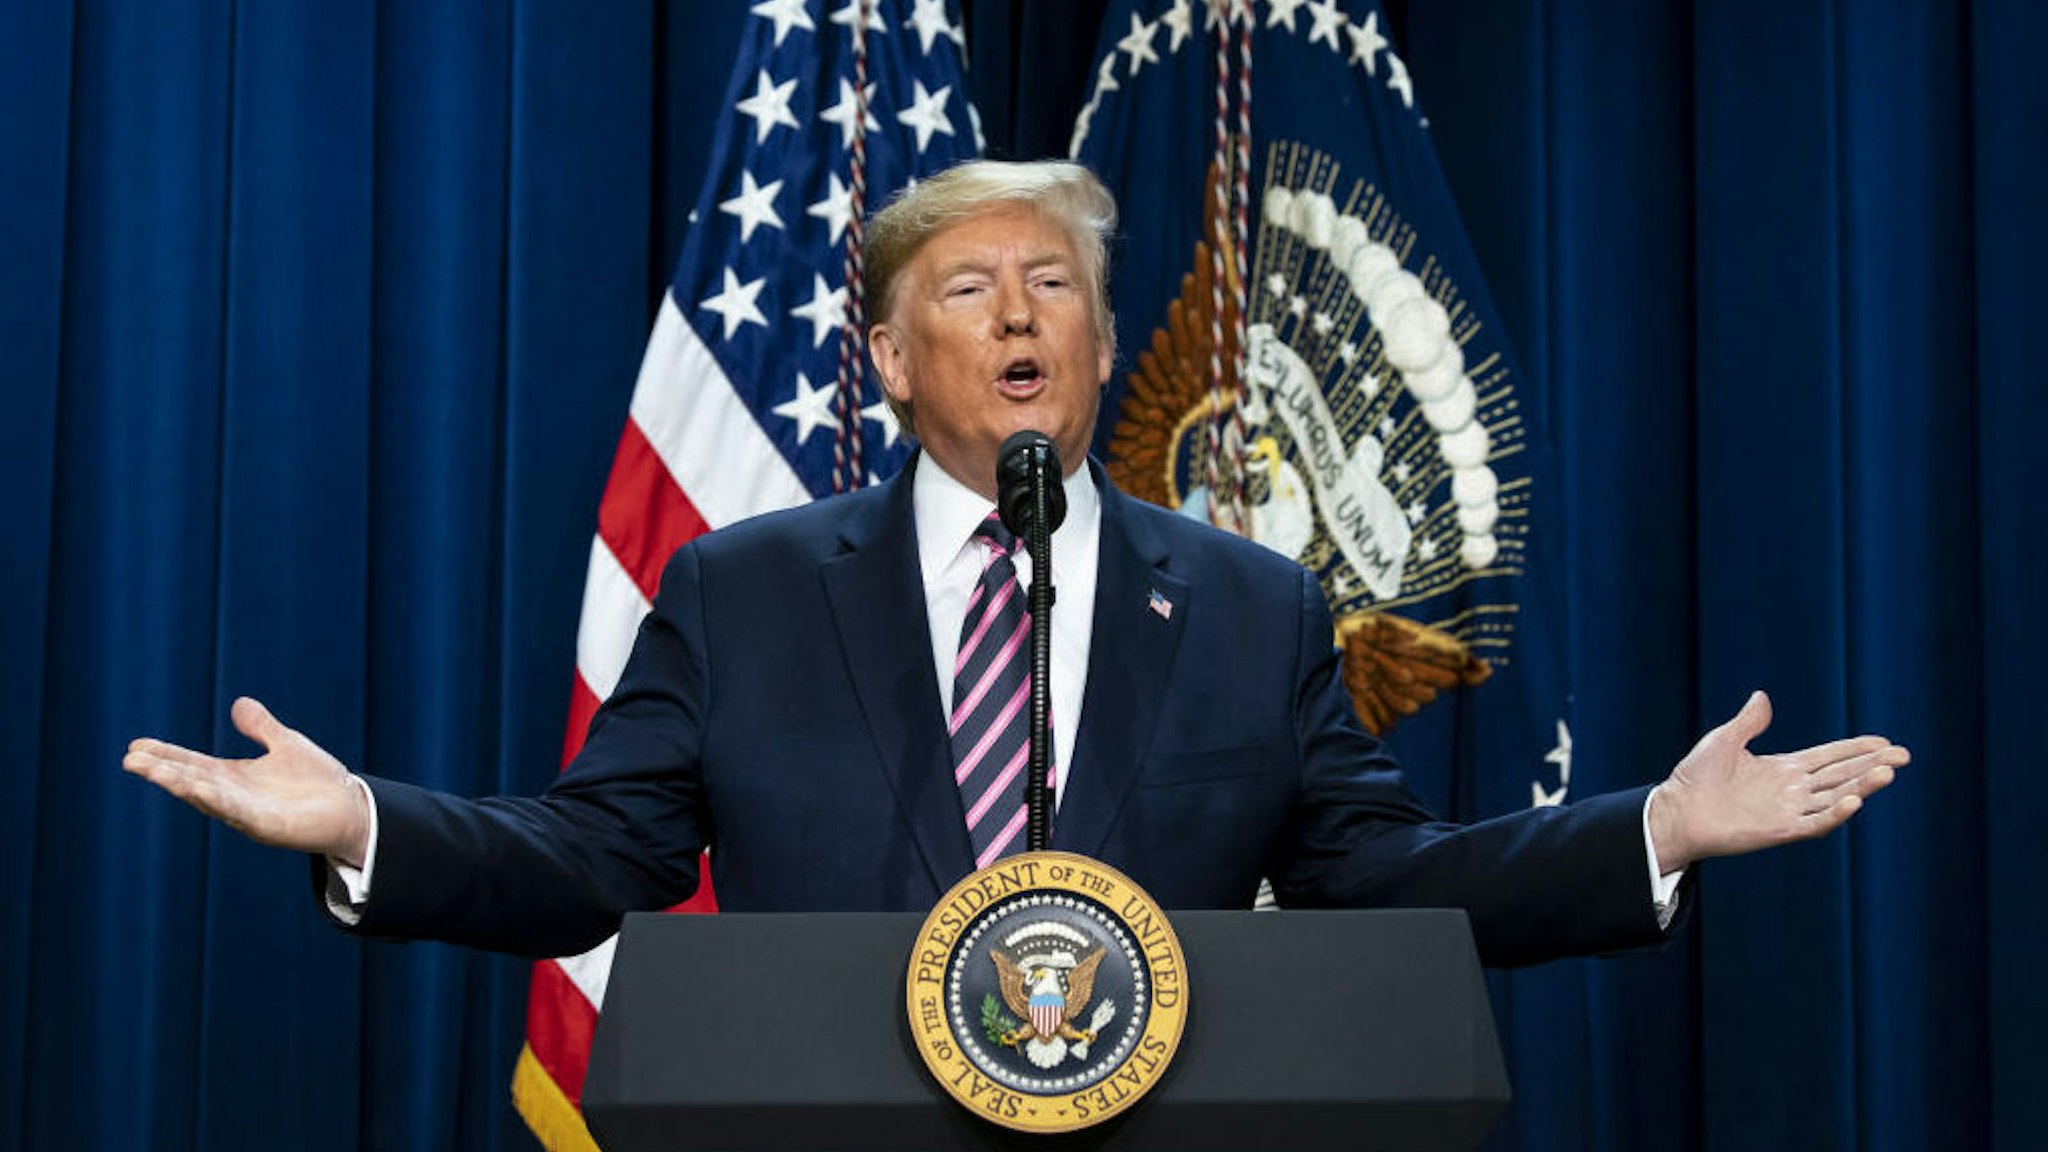 U.S. President Donald Trump speaks during an event at the Eisenhower Executive Office Building in Washington, D.C., U.S., on Thursday, Dec. 19, 2019. The summit was set to discuss mental health treatment as a way to combat homelessness, violence and substance abuse. Photographer: Al Drago/Bloomberg